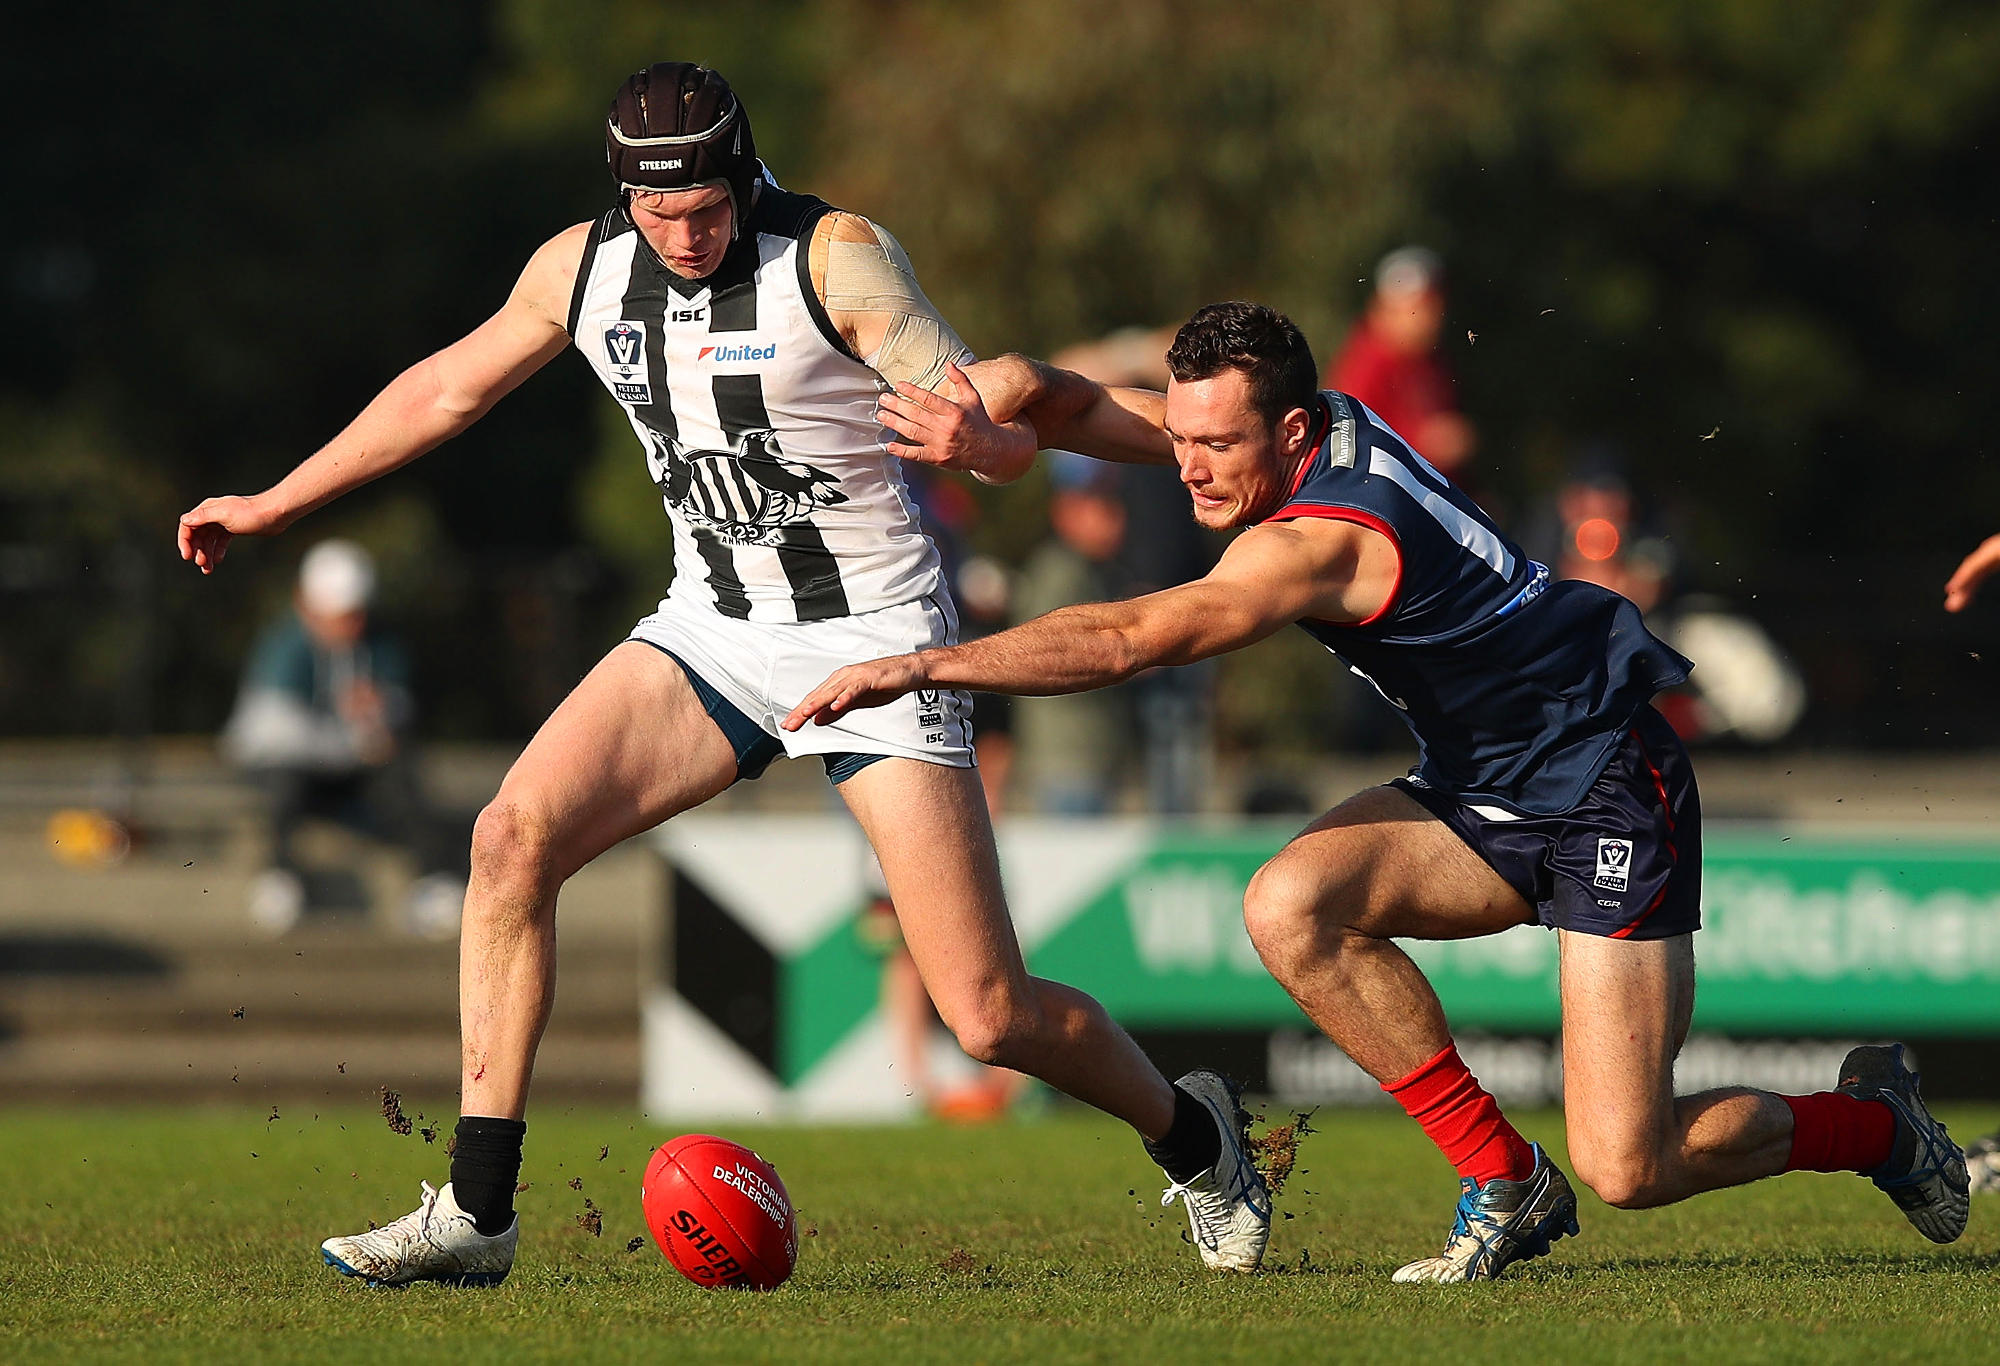 Sam Mclarty of Collingwood (L) chases the ball during the round eight VFL match between Casey Demons and Collingwood Magpies at Casey Fields on June 10, 2017 in Melbourne, Australia.